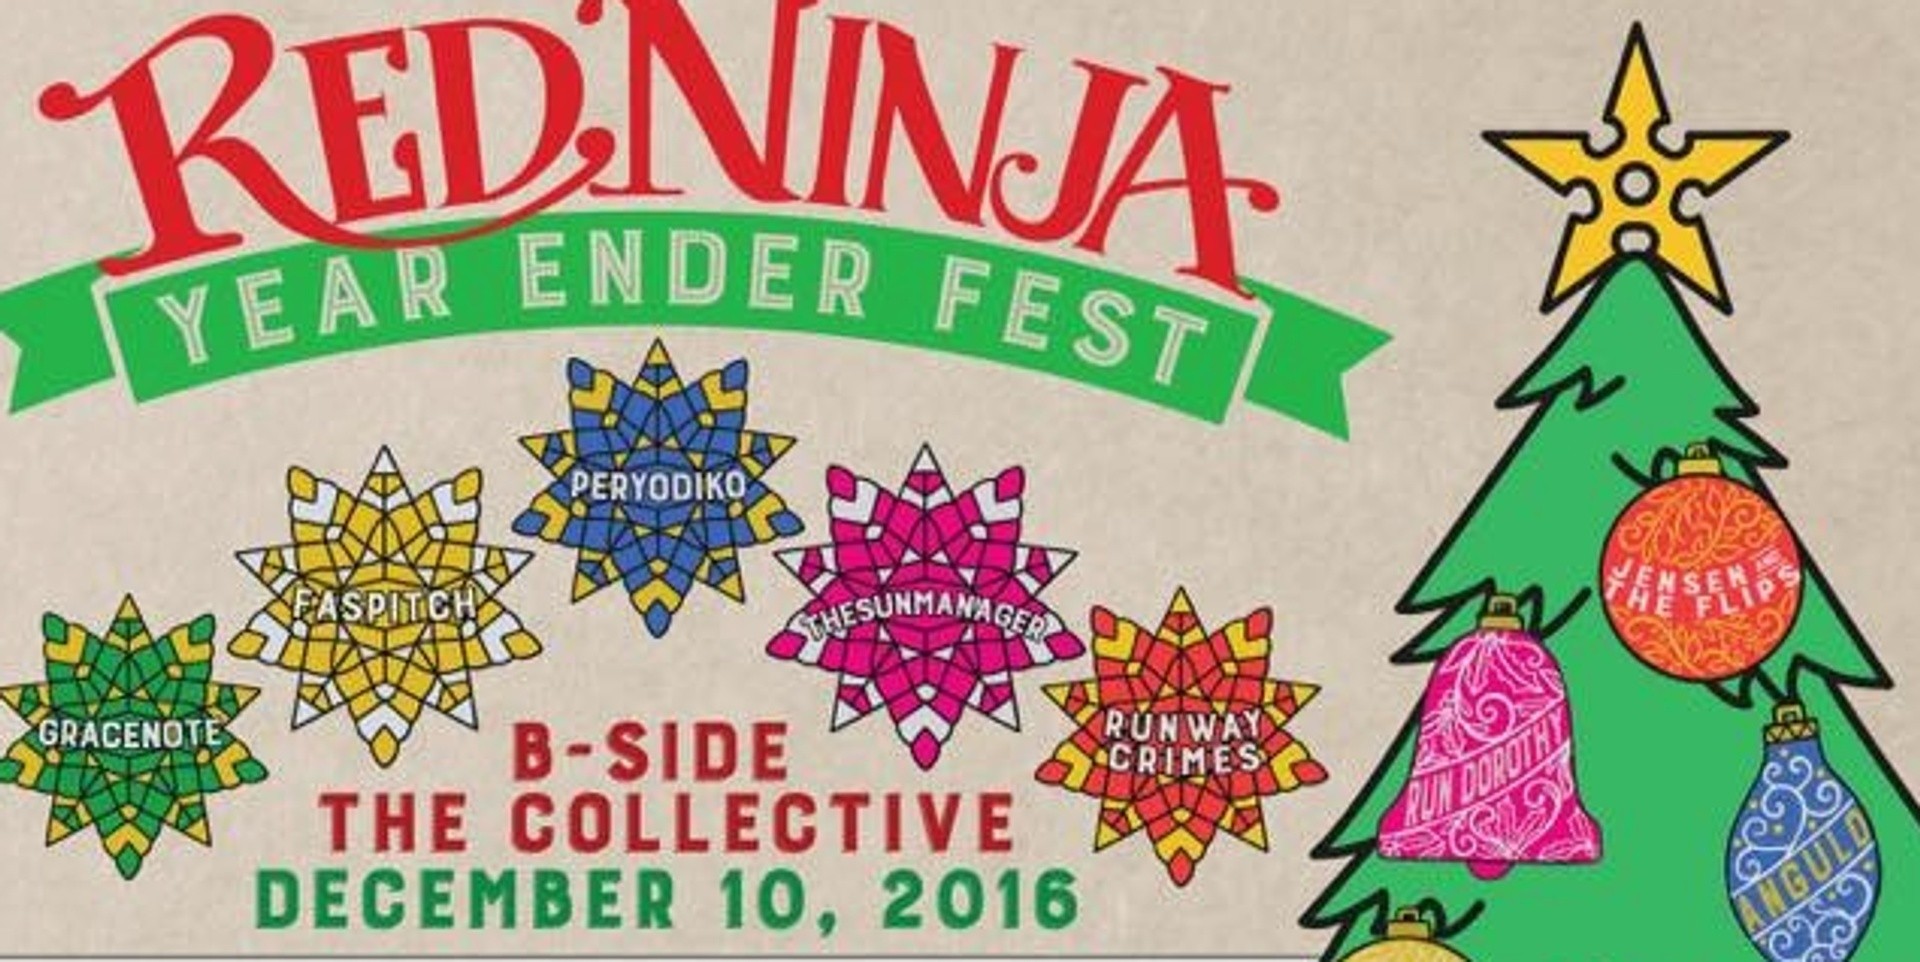 Red Ninja unveils their Year Ender Fest line up